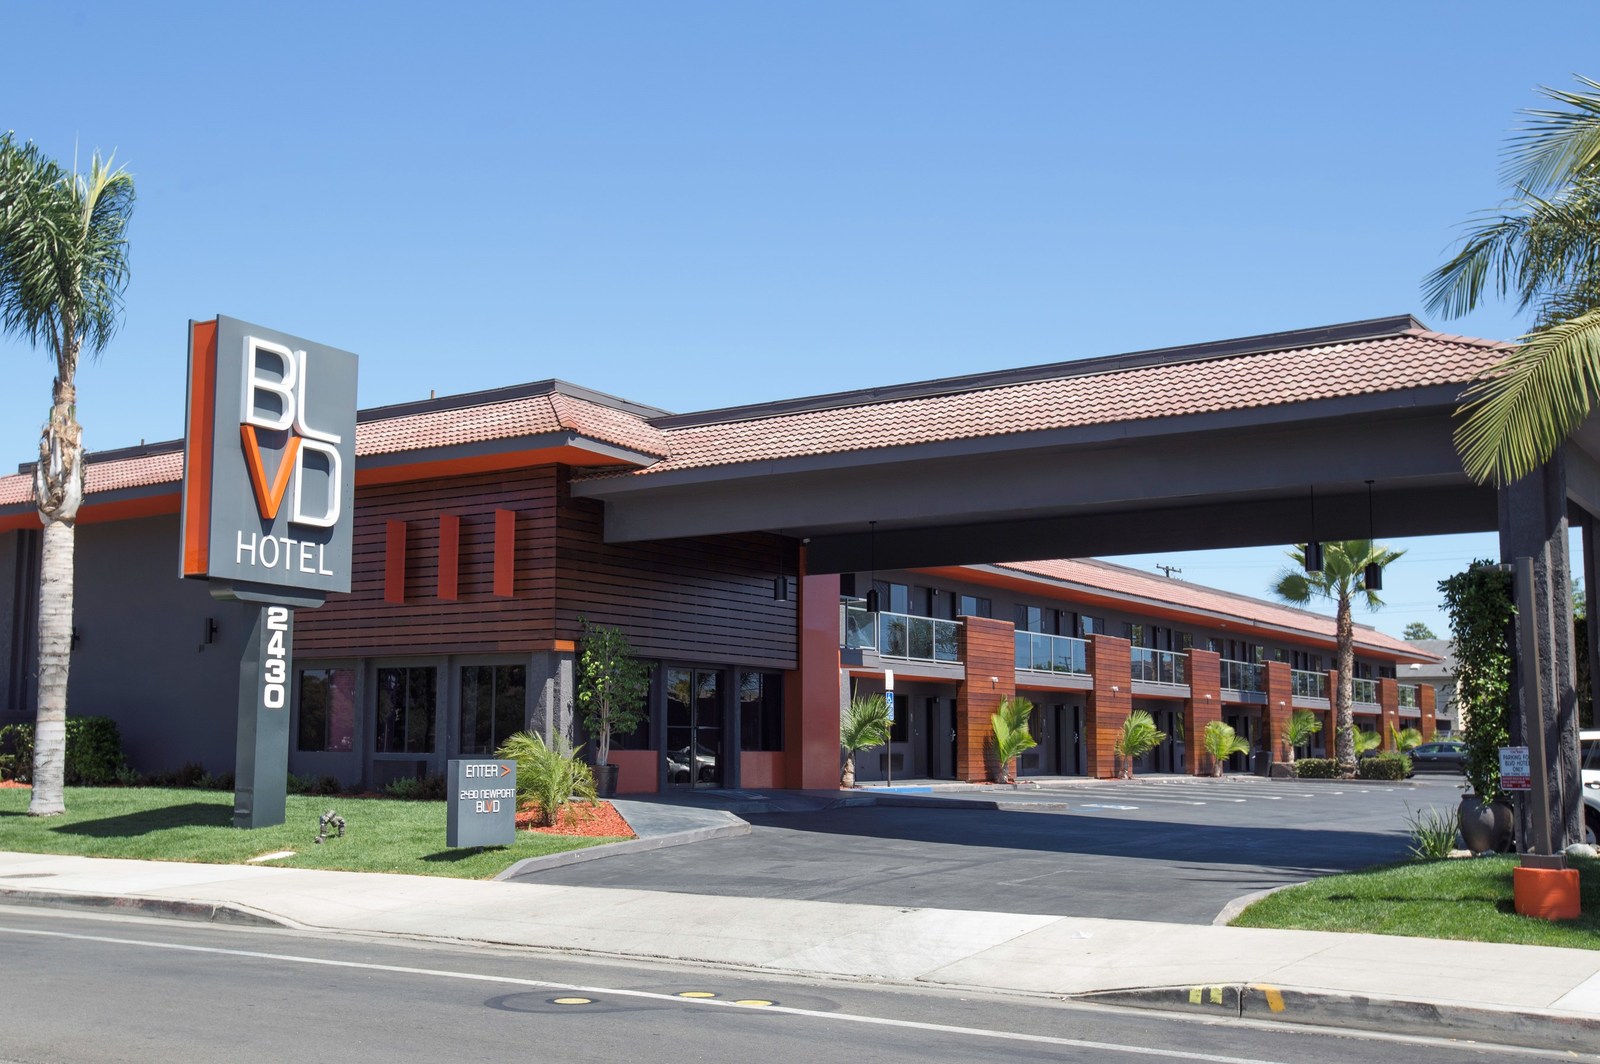 The 58-room BLVD Hotel is located near Disneyland Newport Beach and the Anaheim Convention Center